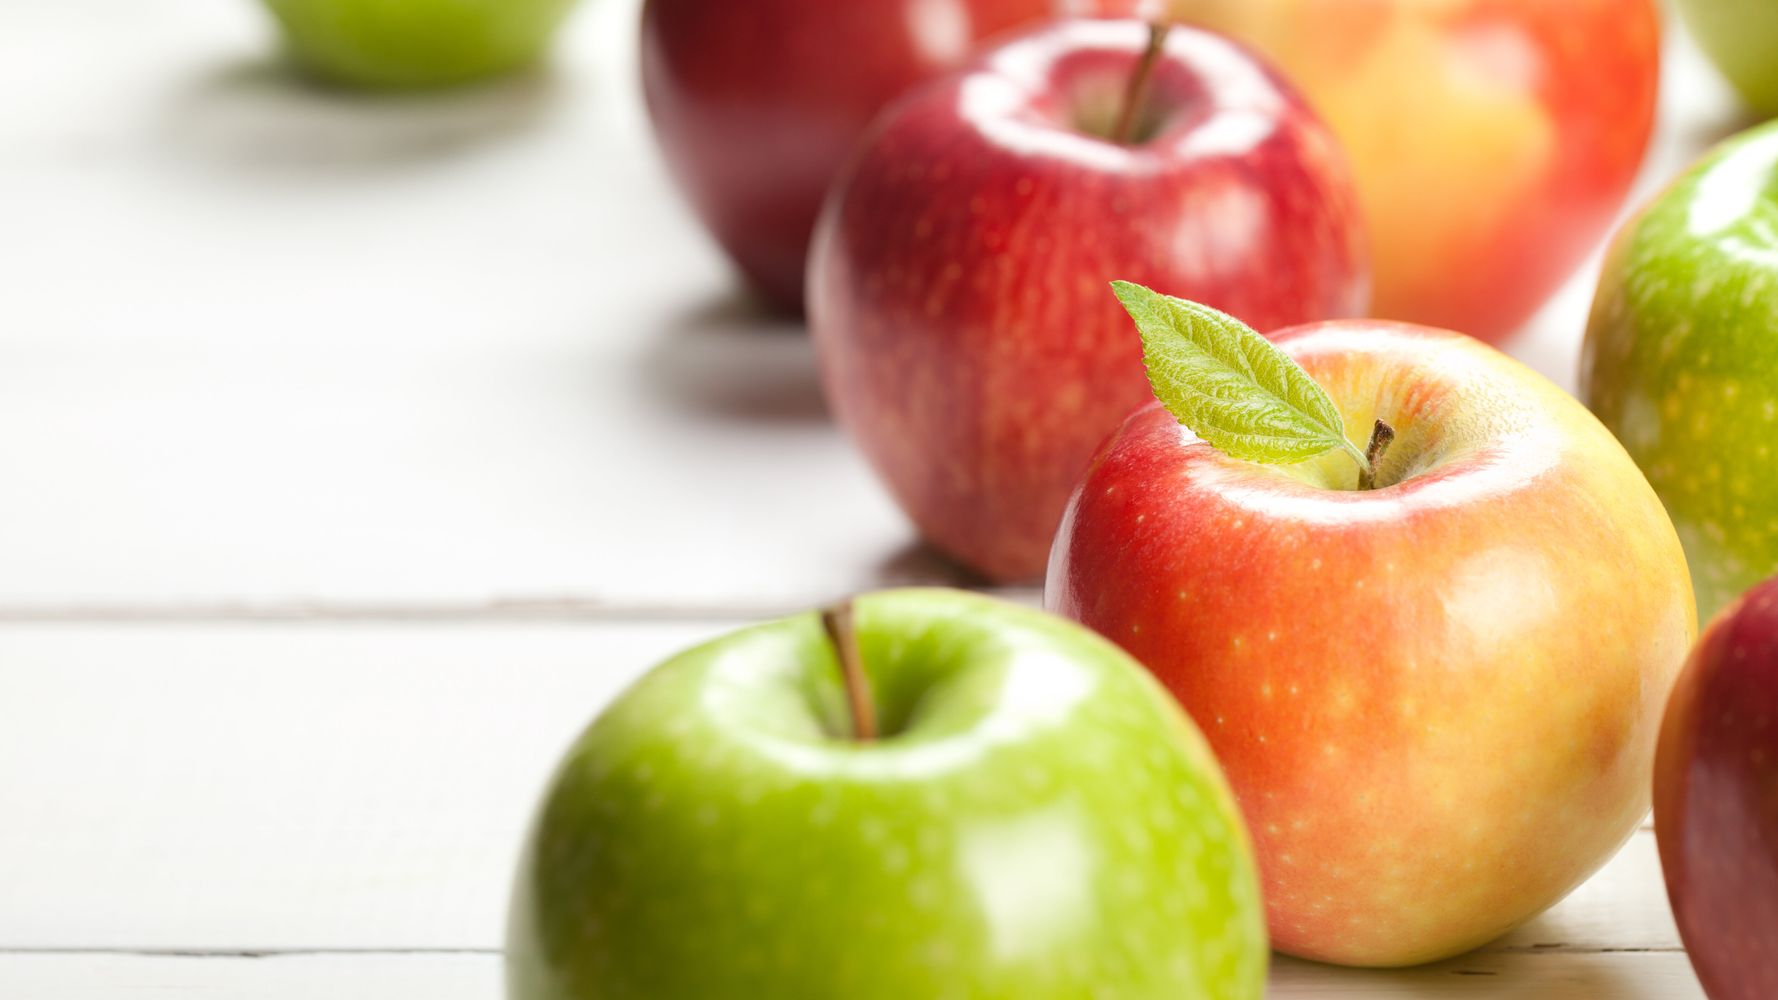 Is There A Difference Between Red And Green Apples? | HuffPost Latest News